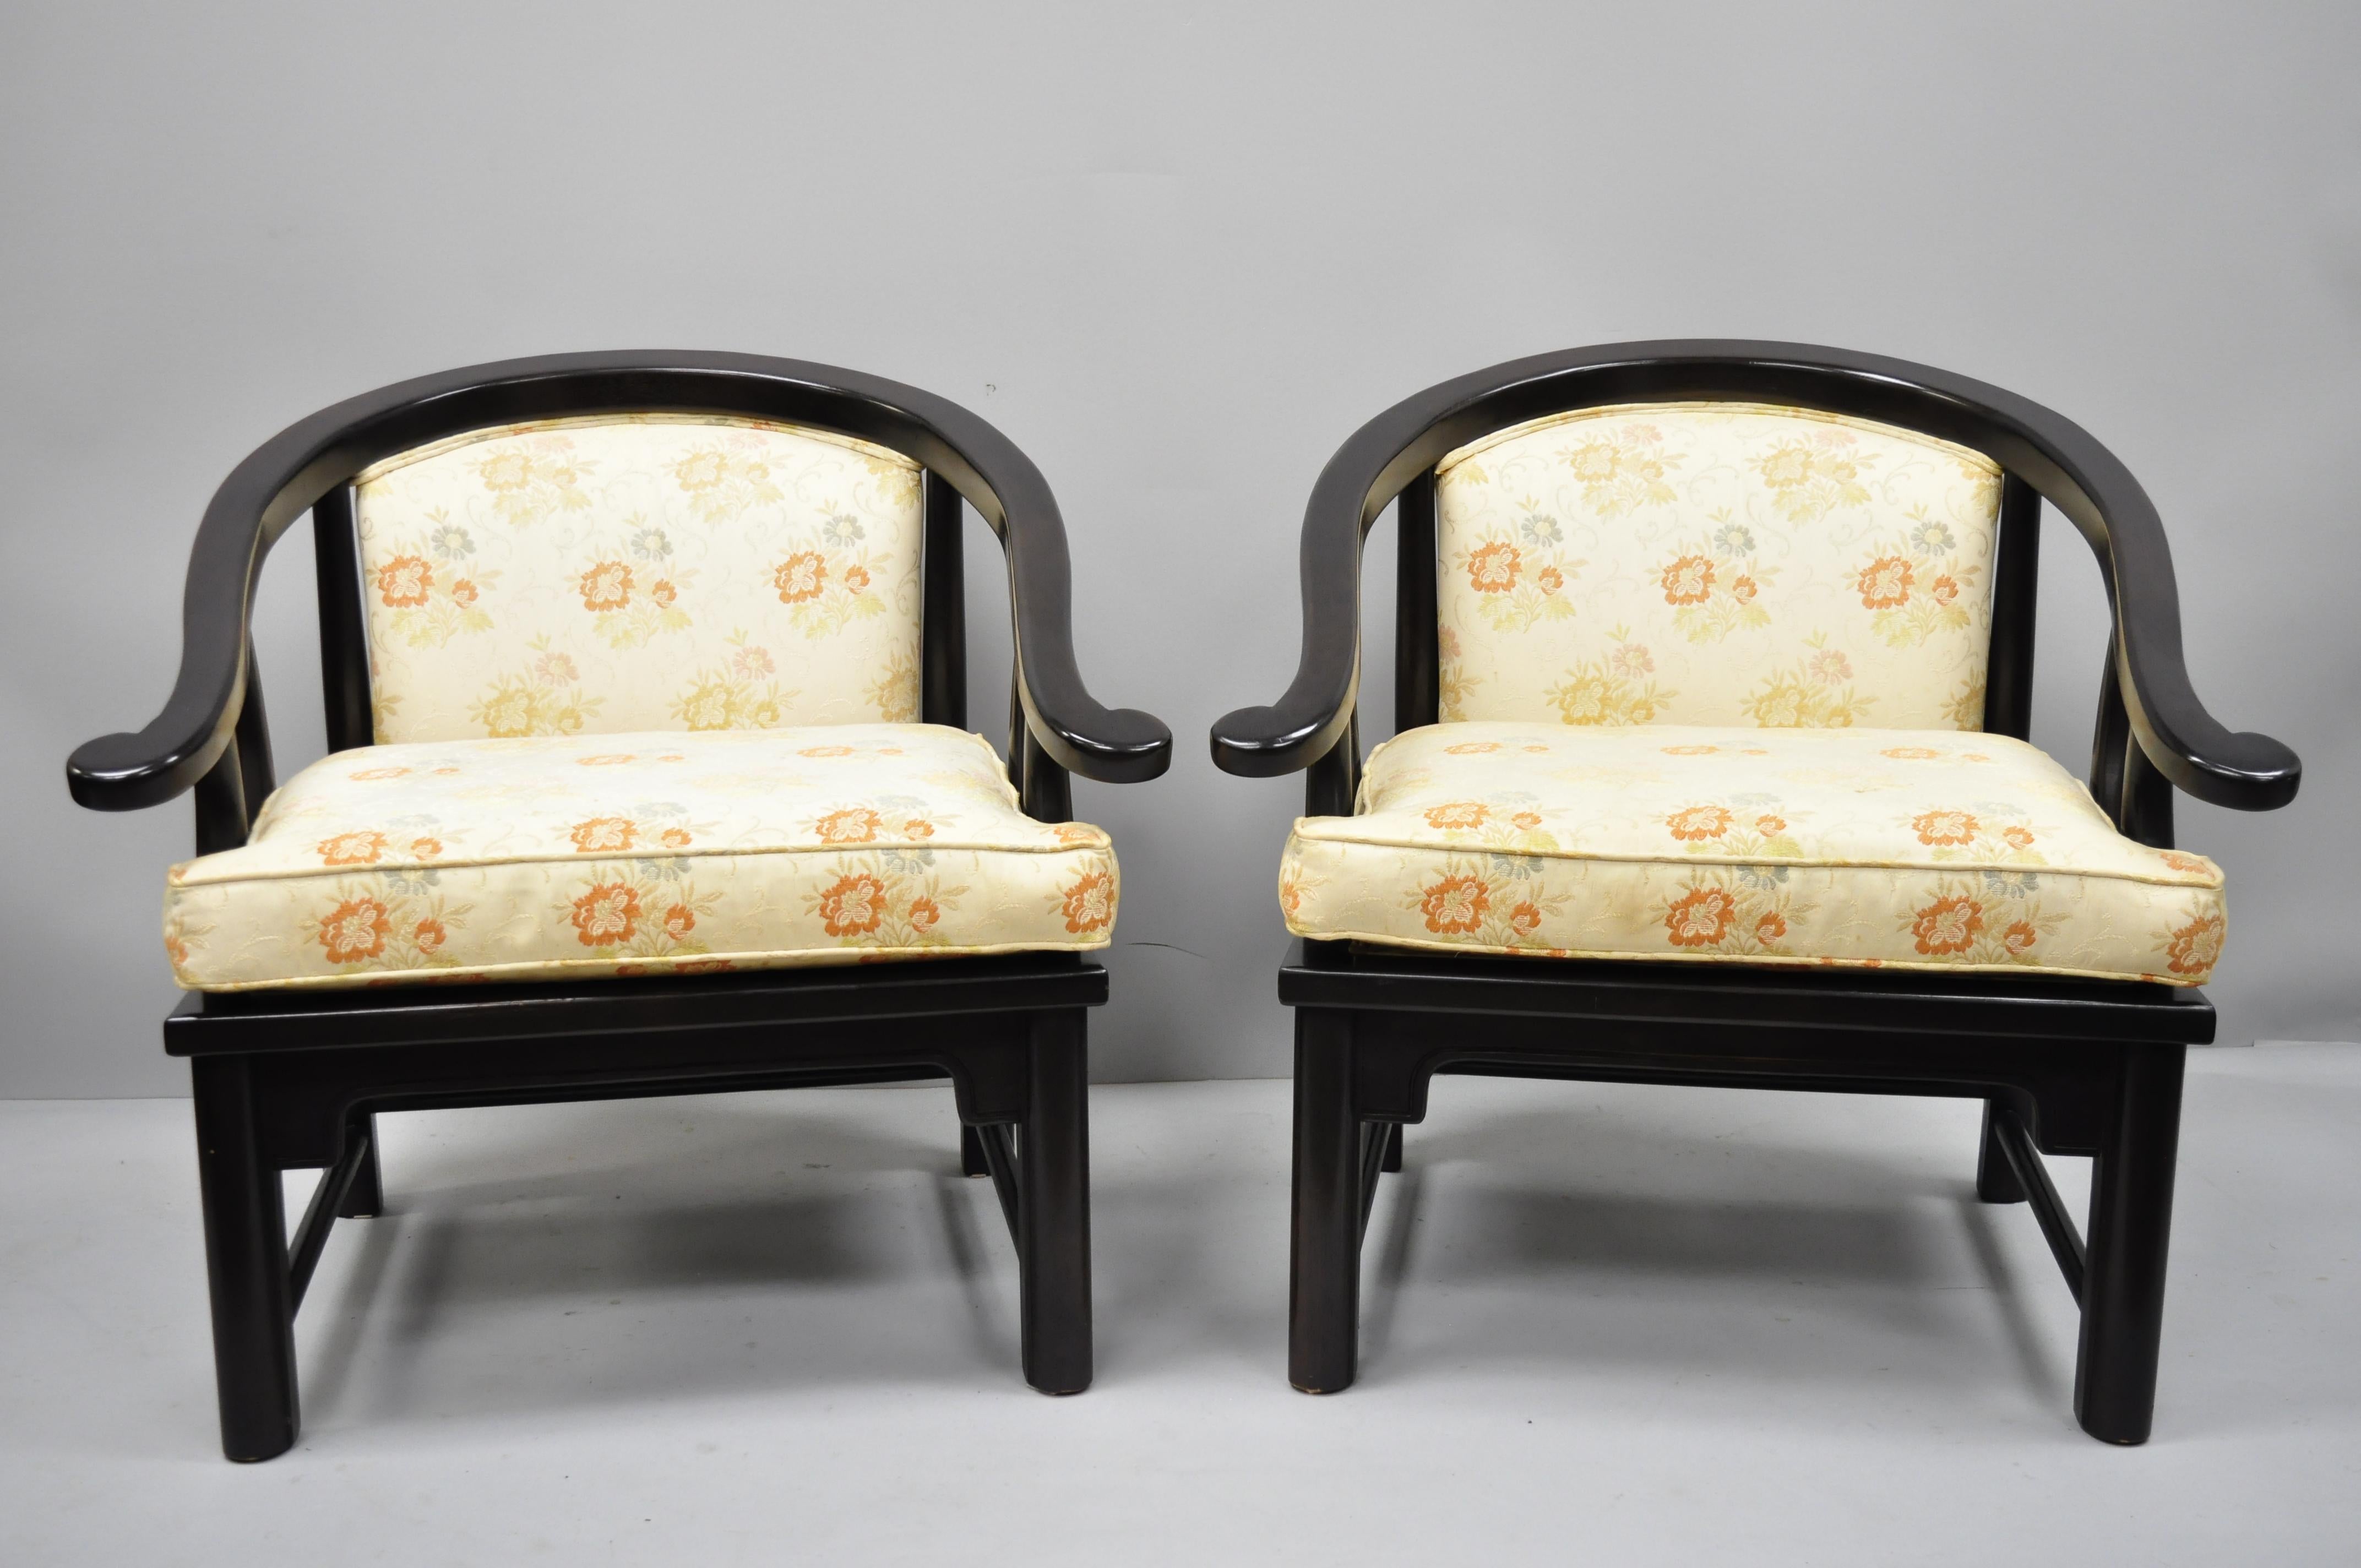 Pair James Mont style horseshoe Ming style armchairs by Century Chair Co. (A). Item features solid wood construction, beautiful wood grain, great style and form, circa mid-20th century. Measurements: 30